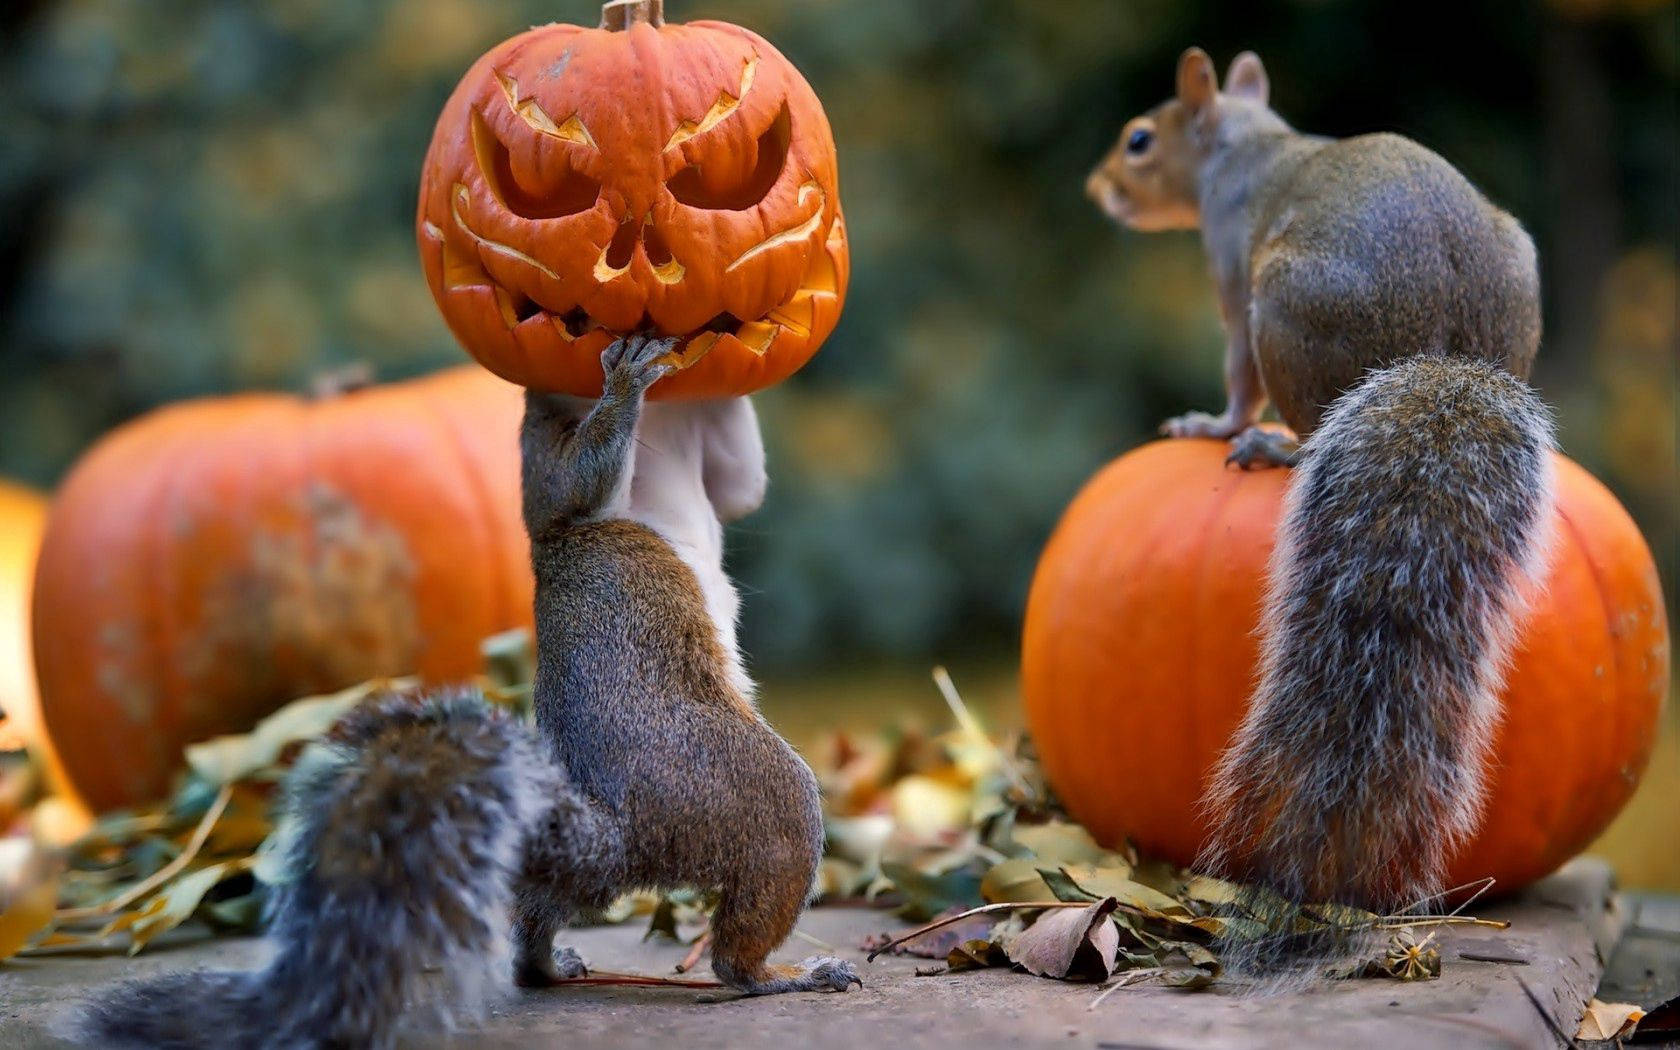 Squirrels holding a pumpkin on a forest, one squirrel on top of a pumpkin for halloween